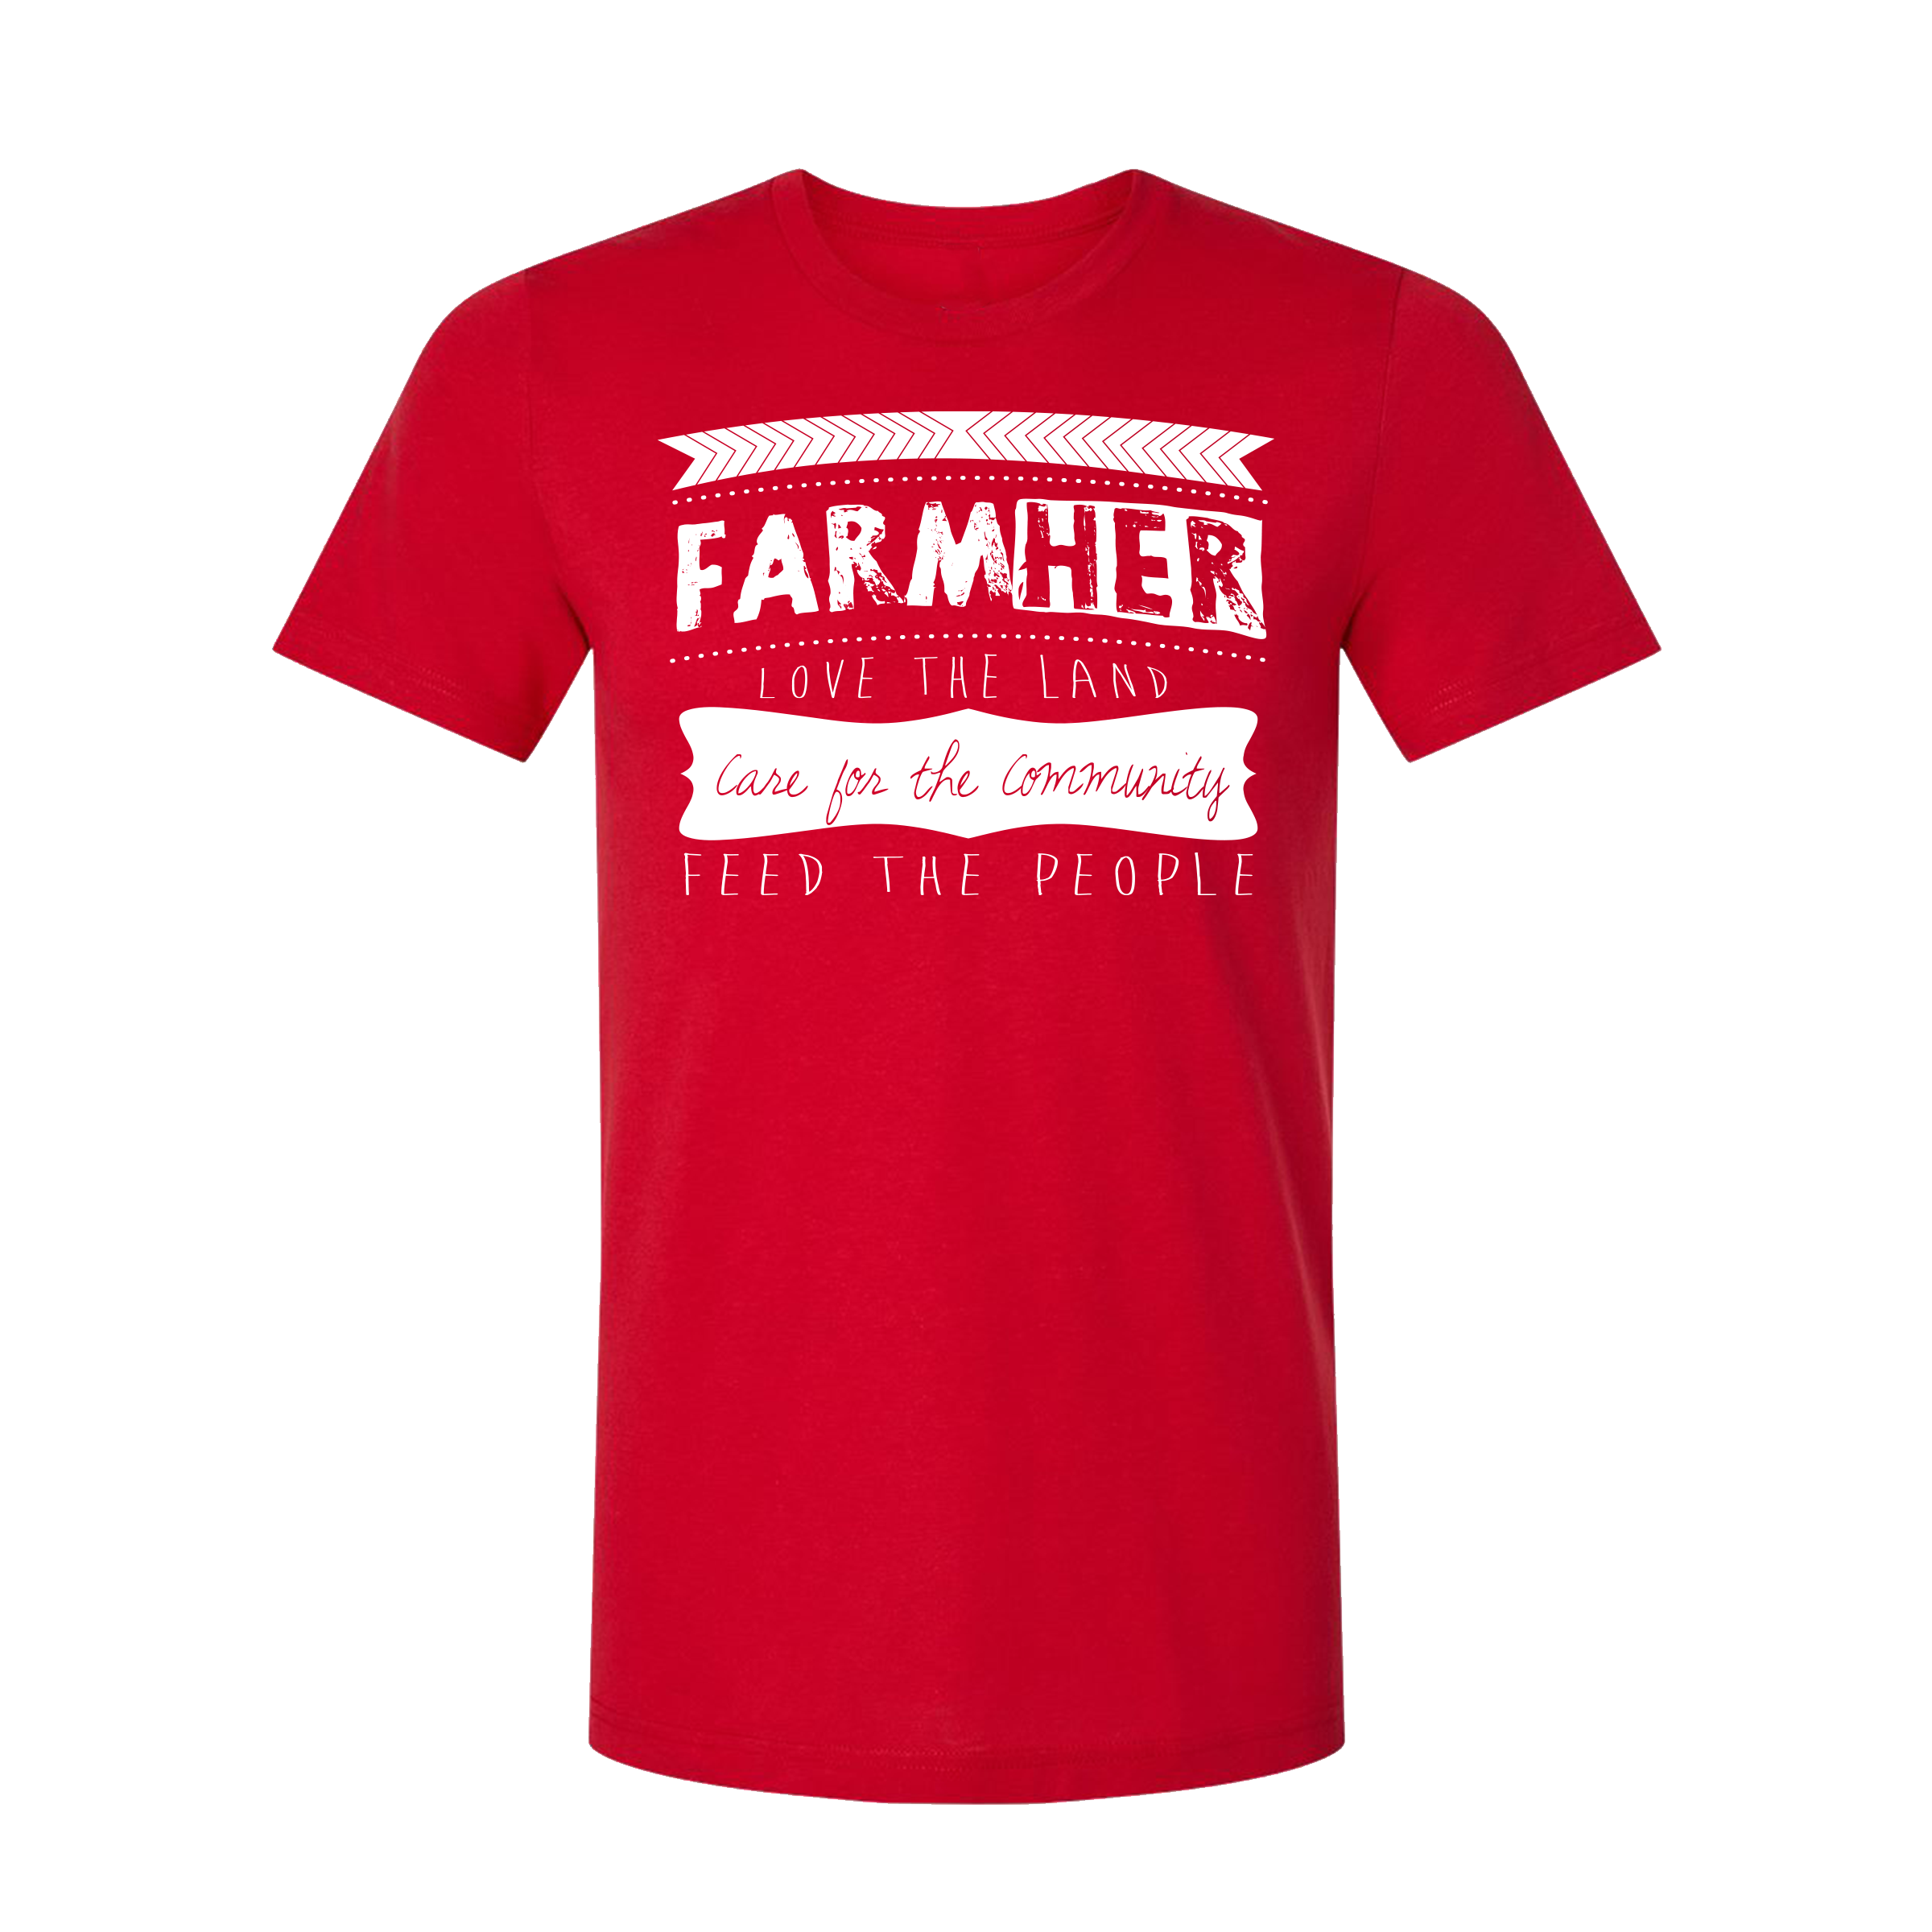 "Love The Land, Care for the Community, Feed The People" Red FarmHer T-Shirt